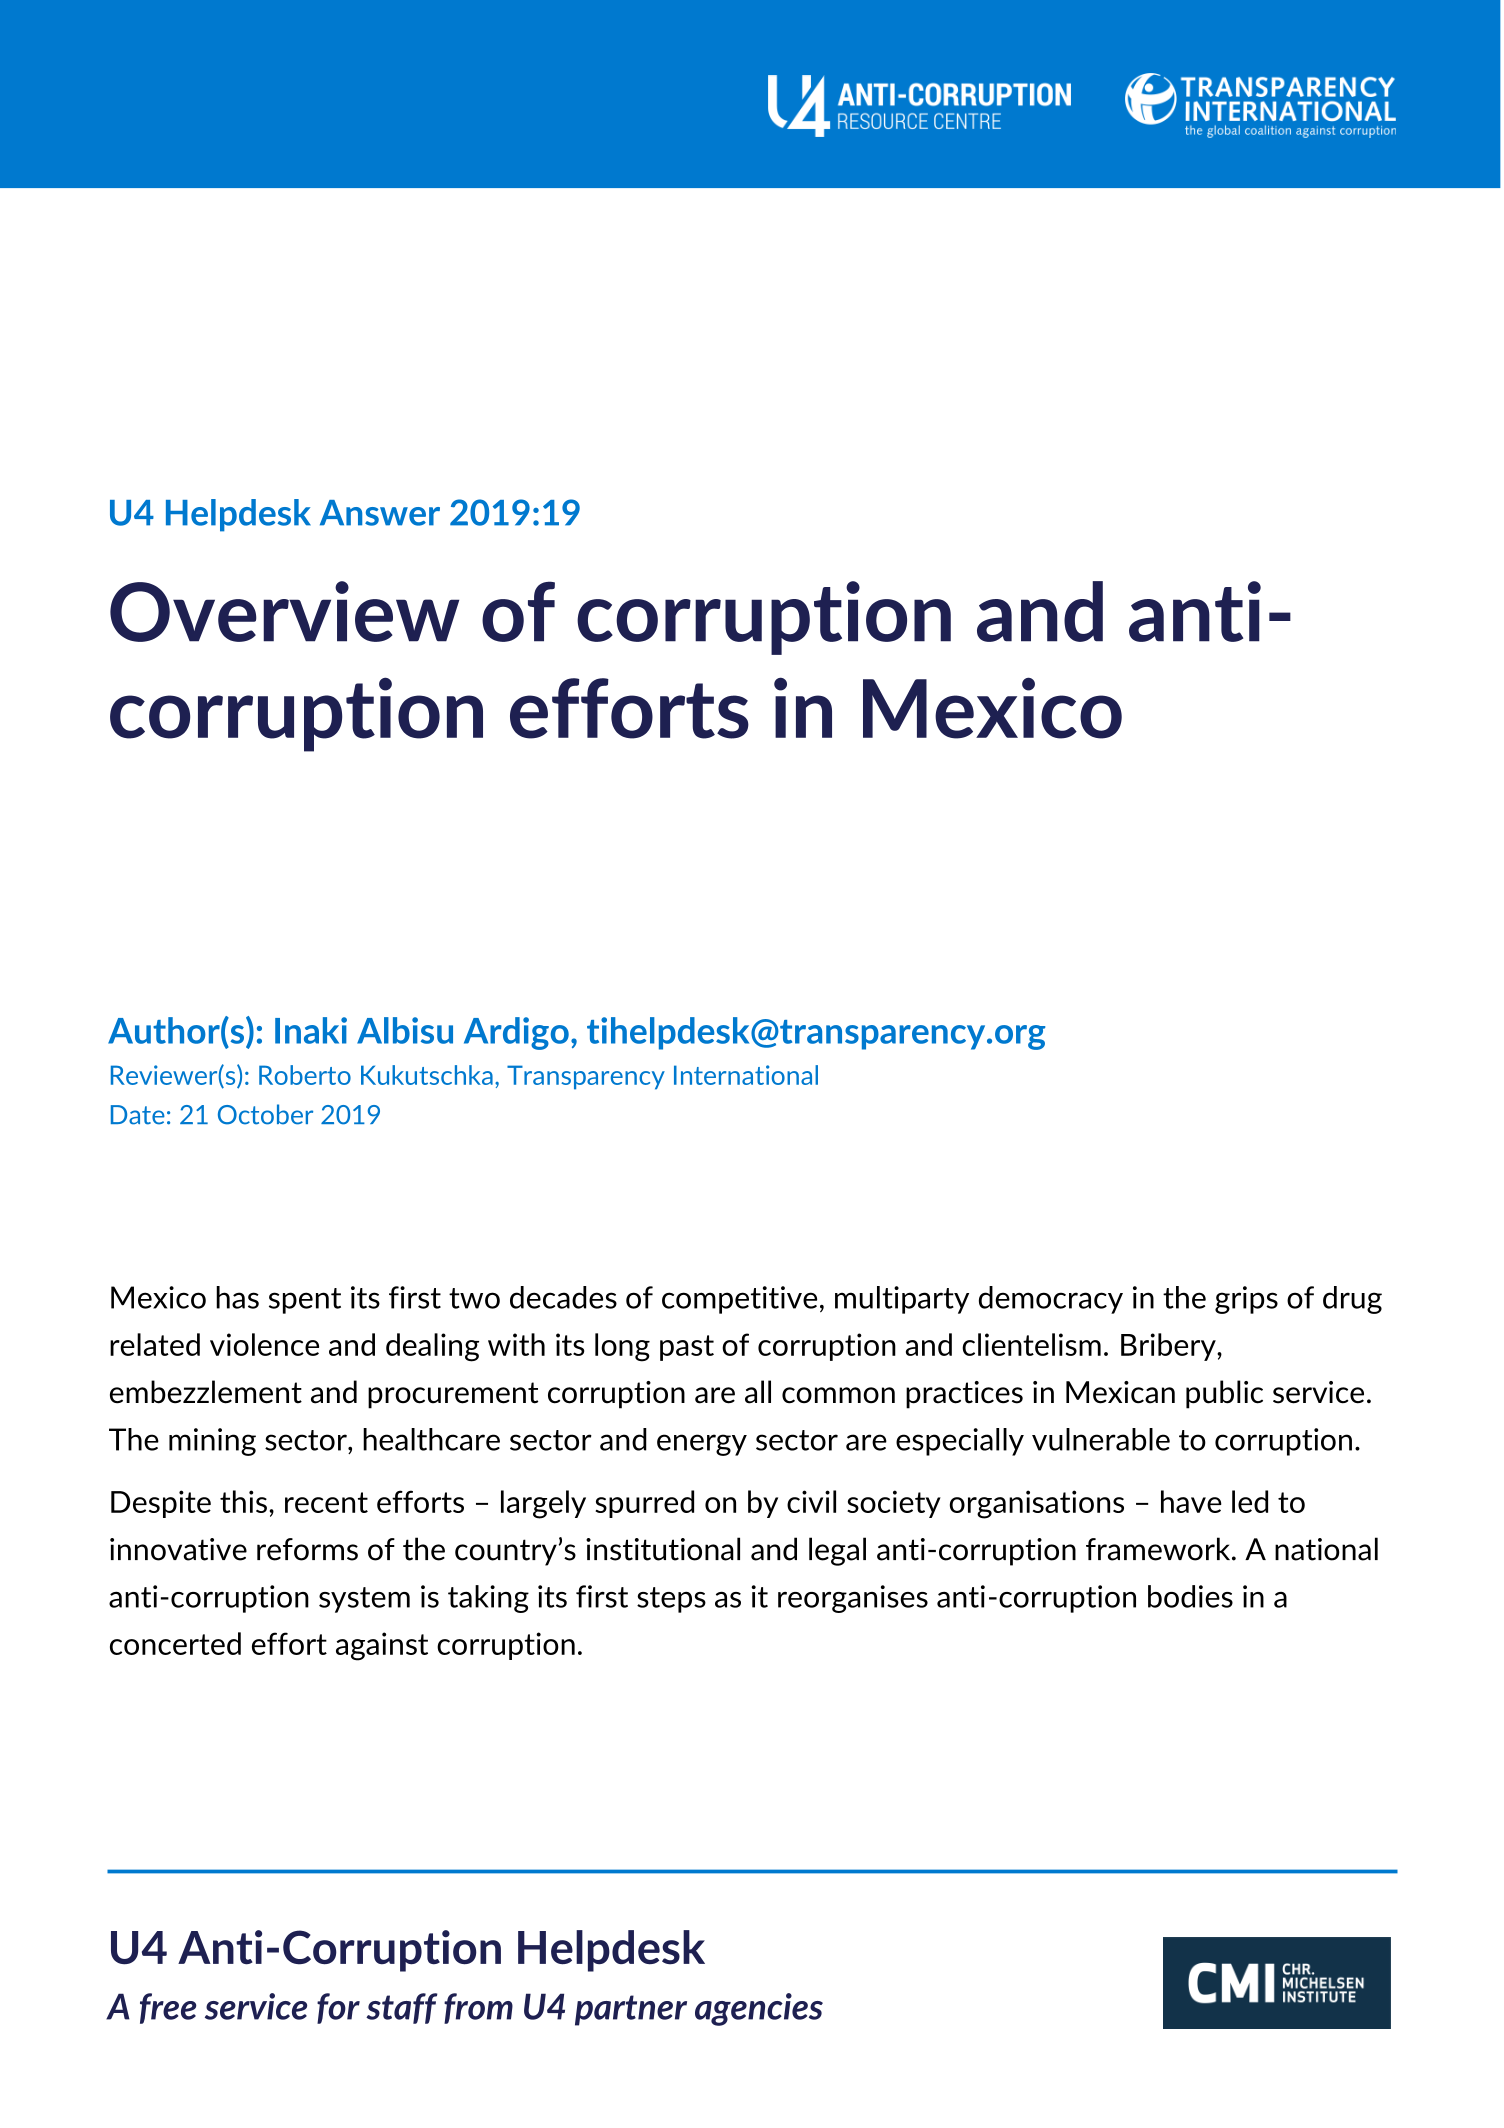 Mexico: Overview of corruption and anti-corruption efforts